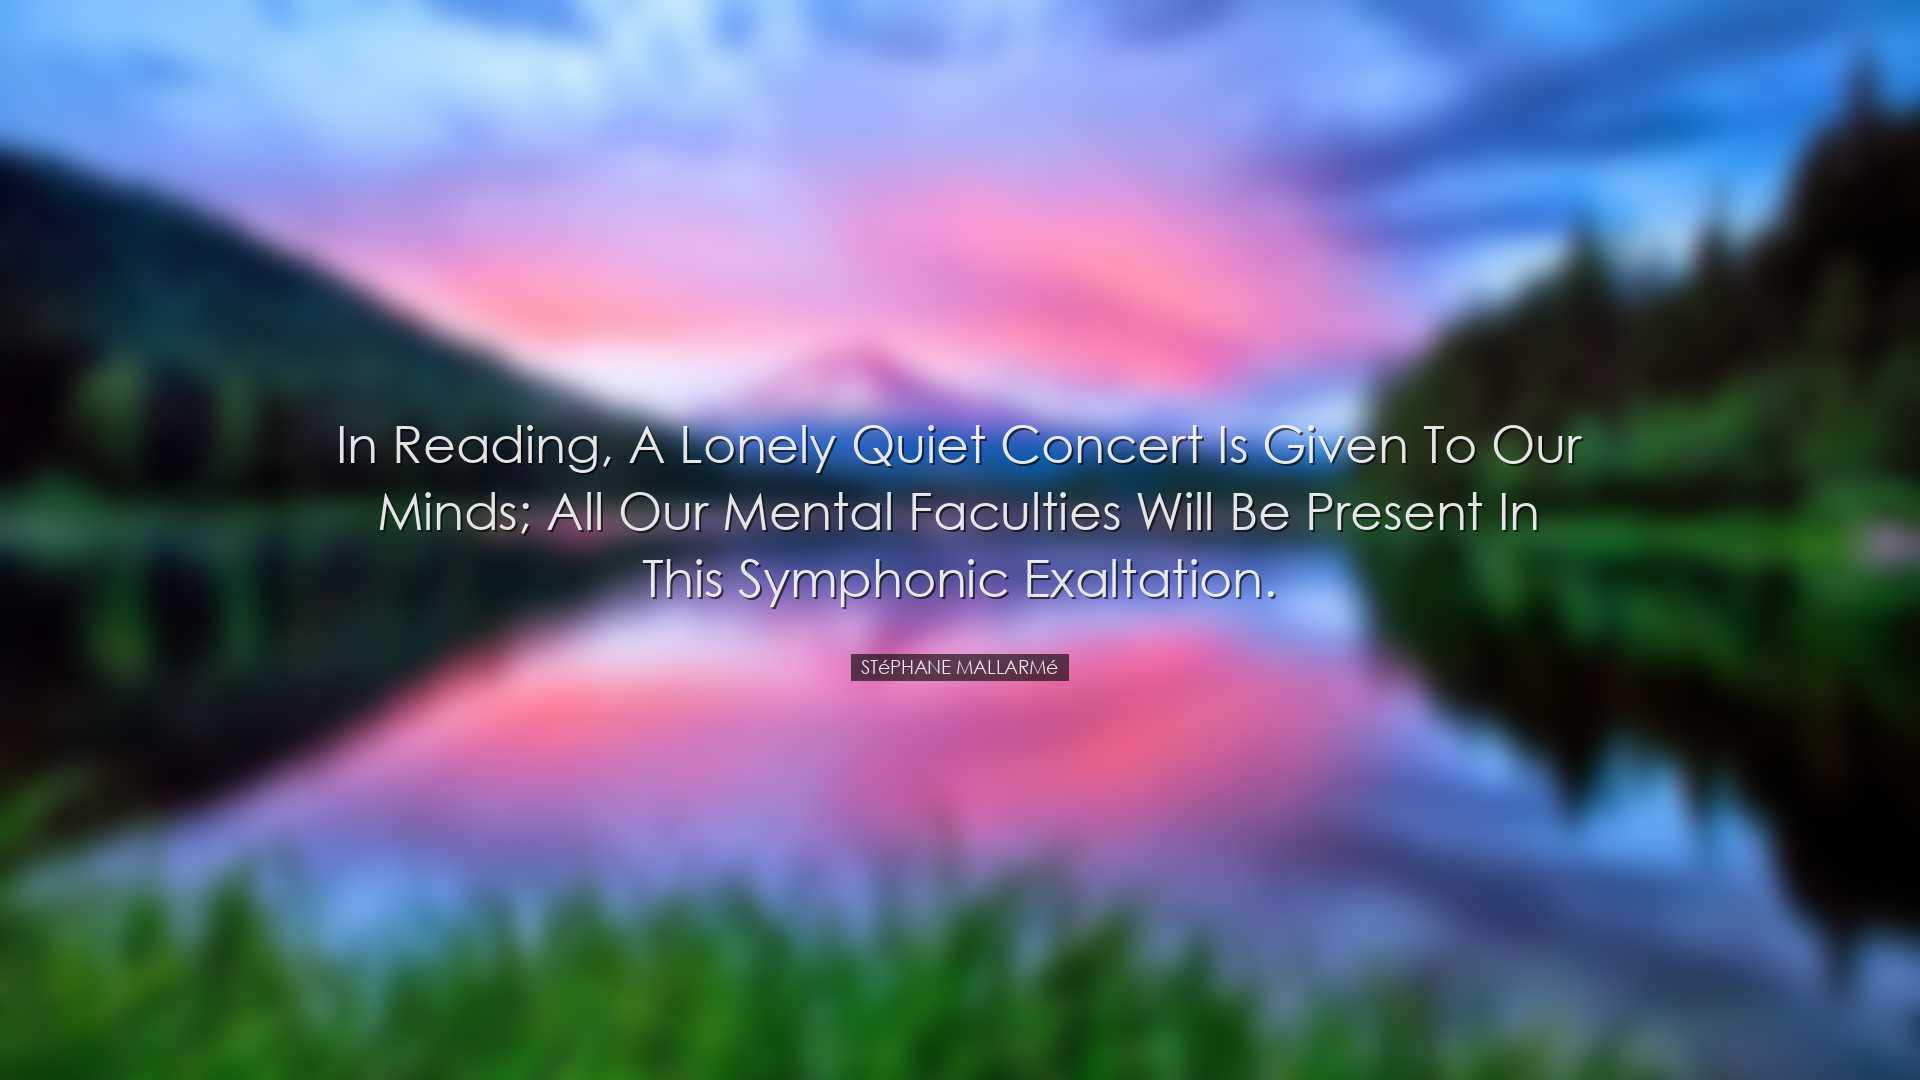 In reading, a lonely quiet concert is given to our minds; all our